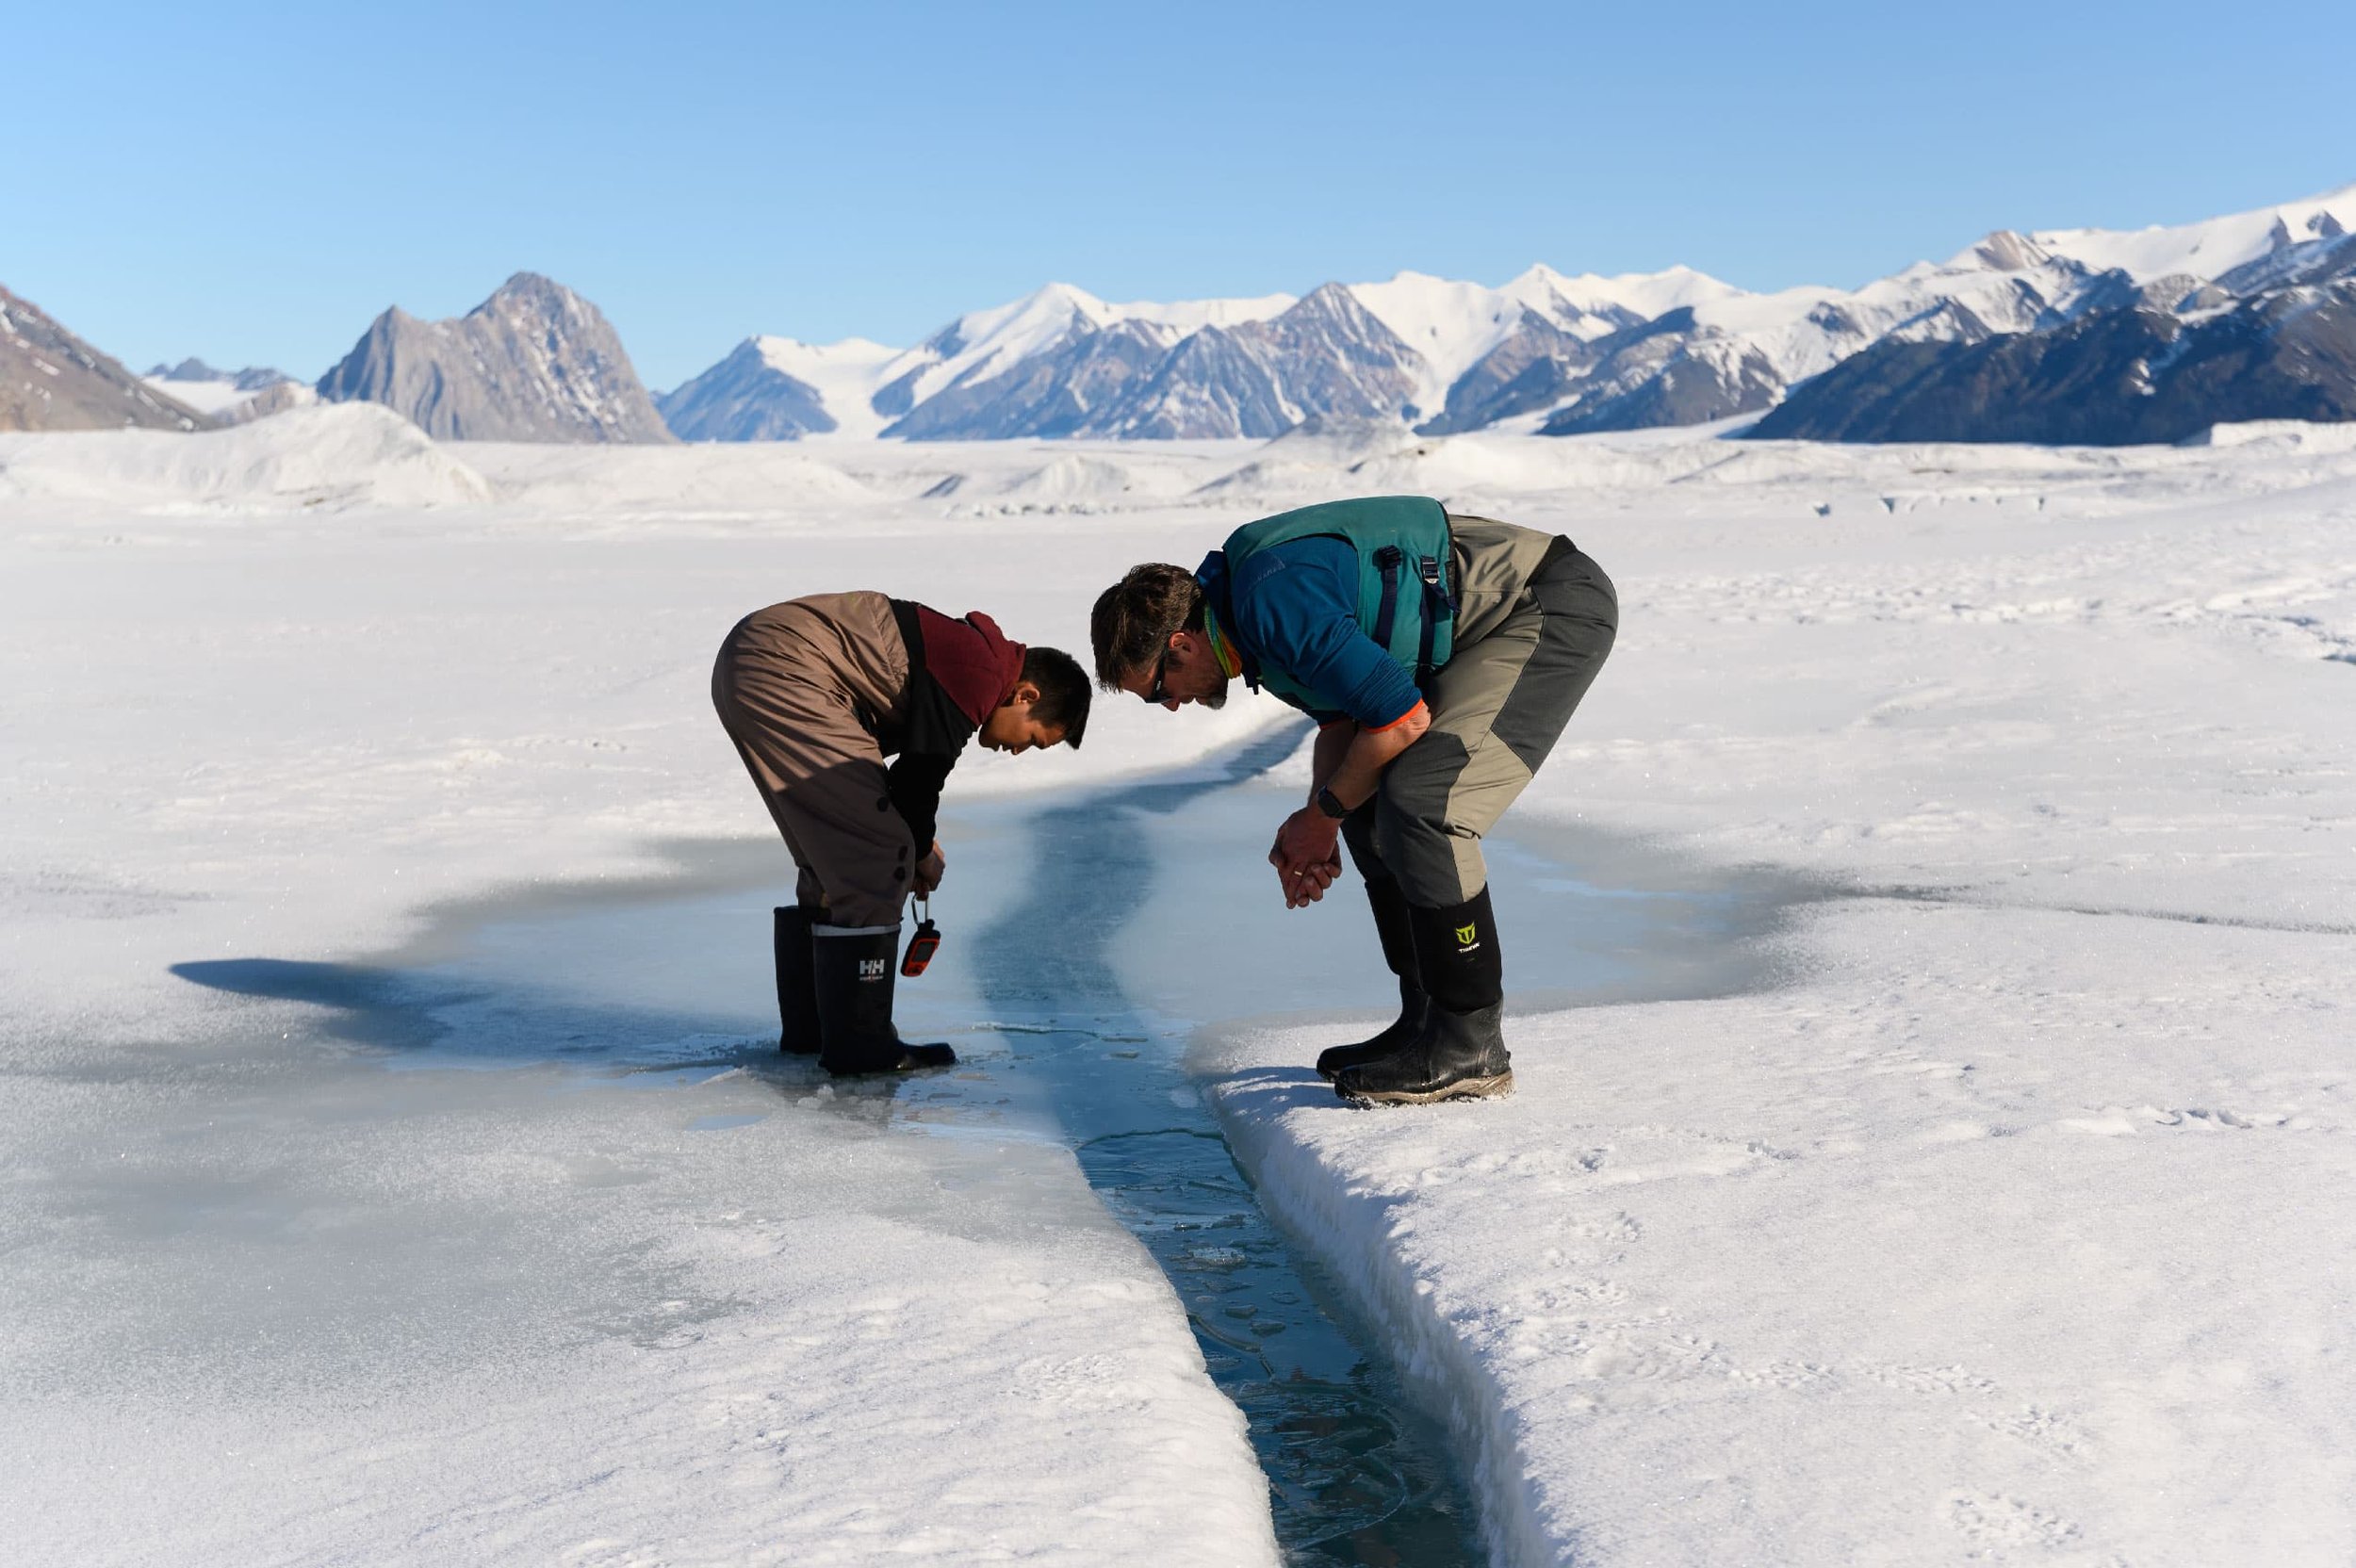  Joseph Shoapik, a resident of Grise Fiord, Nvt., peers down into a crack in the ice alongside Alex Forrest, a limnologist from the University of California, Davis. Just below this ice, a thin layer of freshwater used to float on top of the seawater 